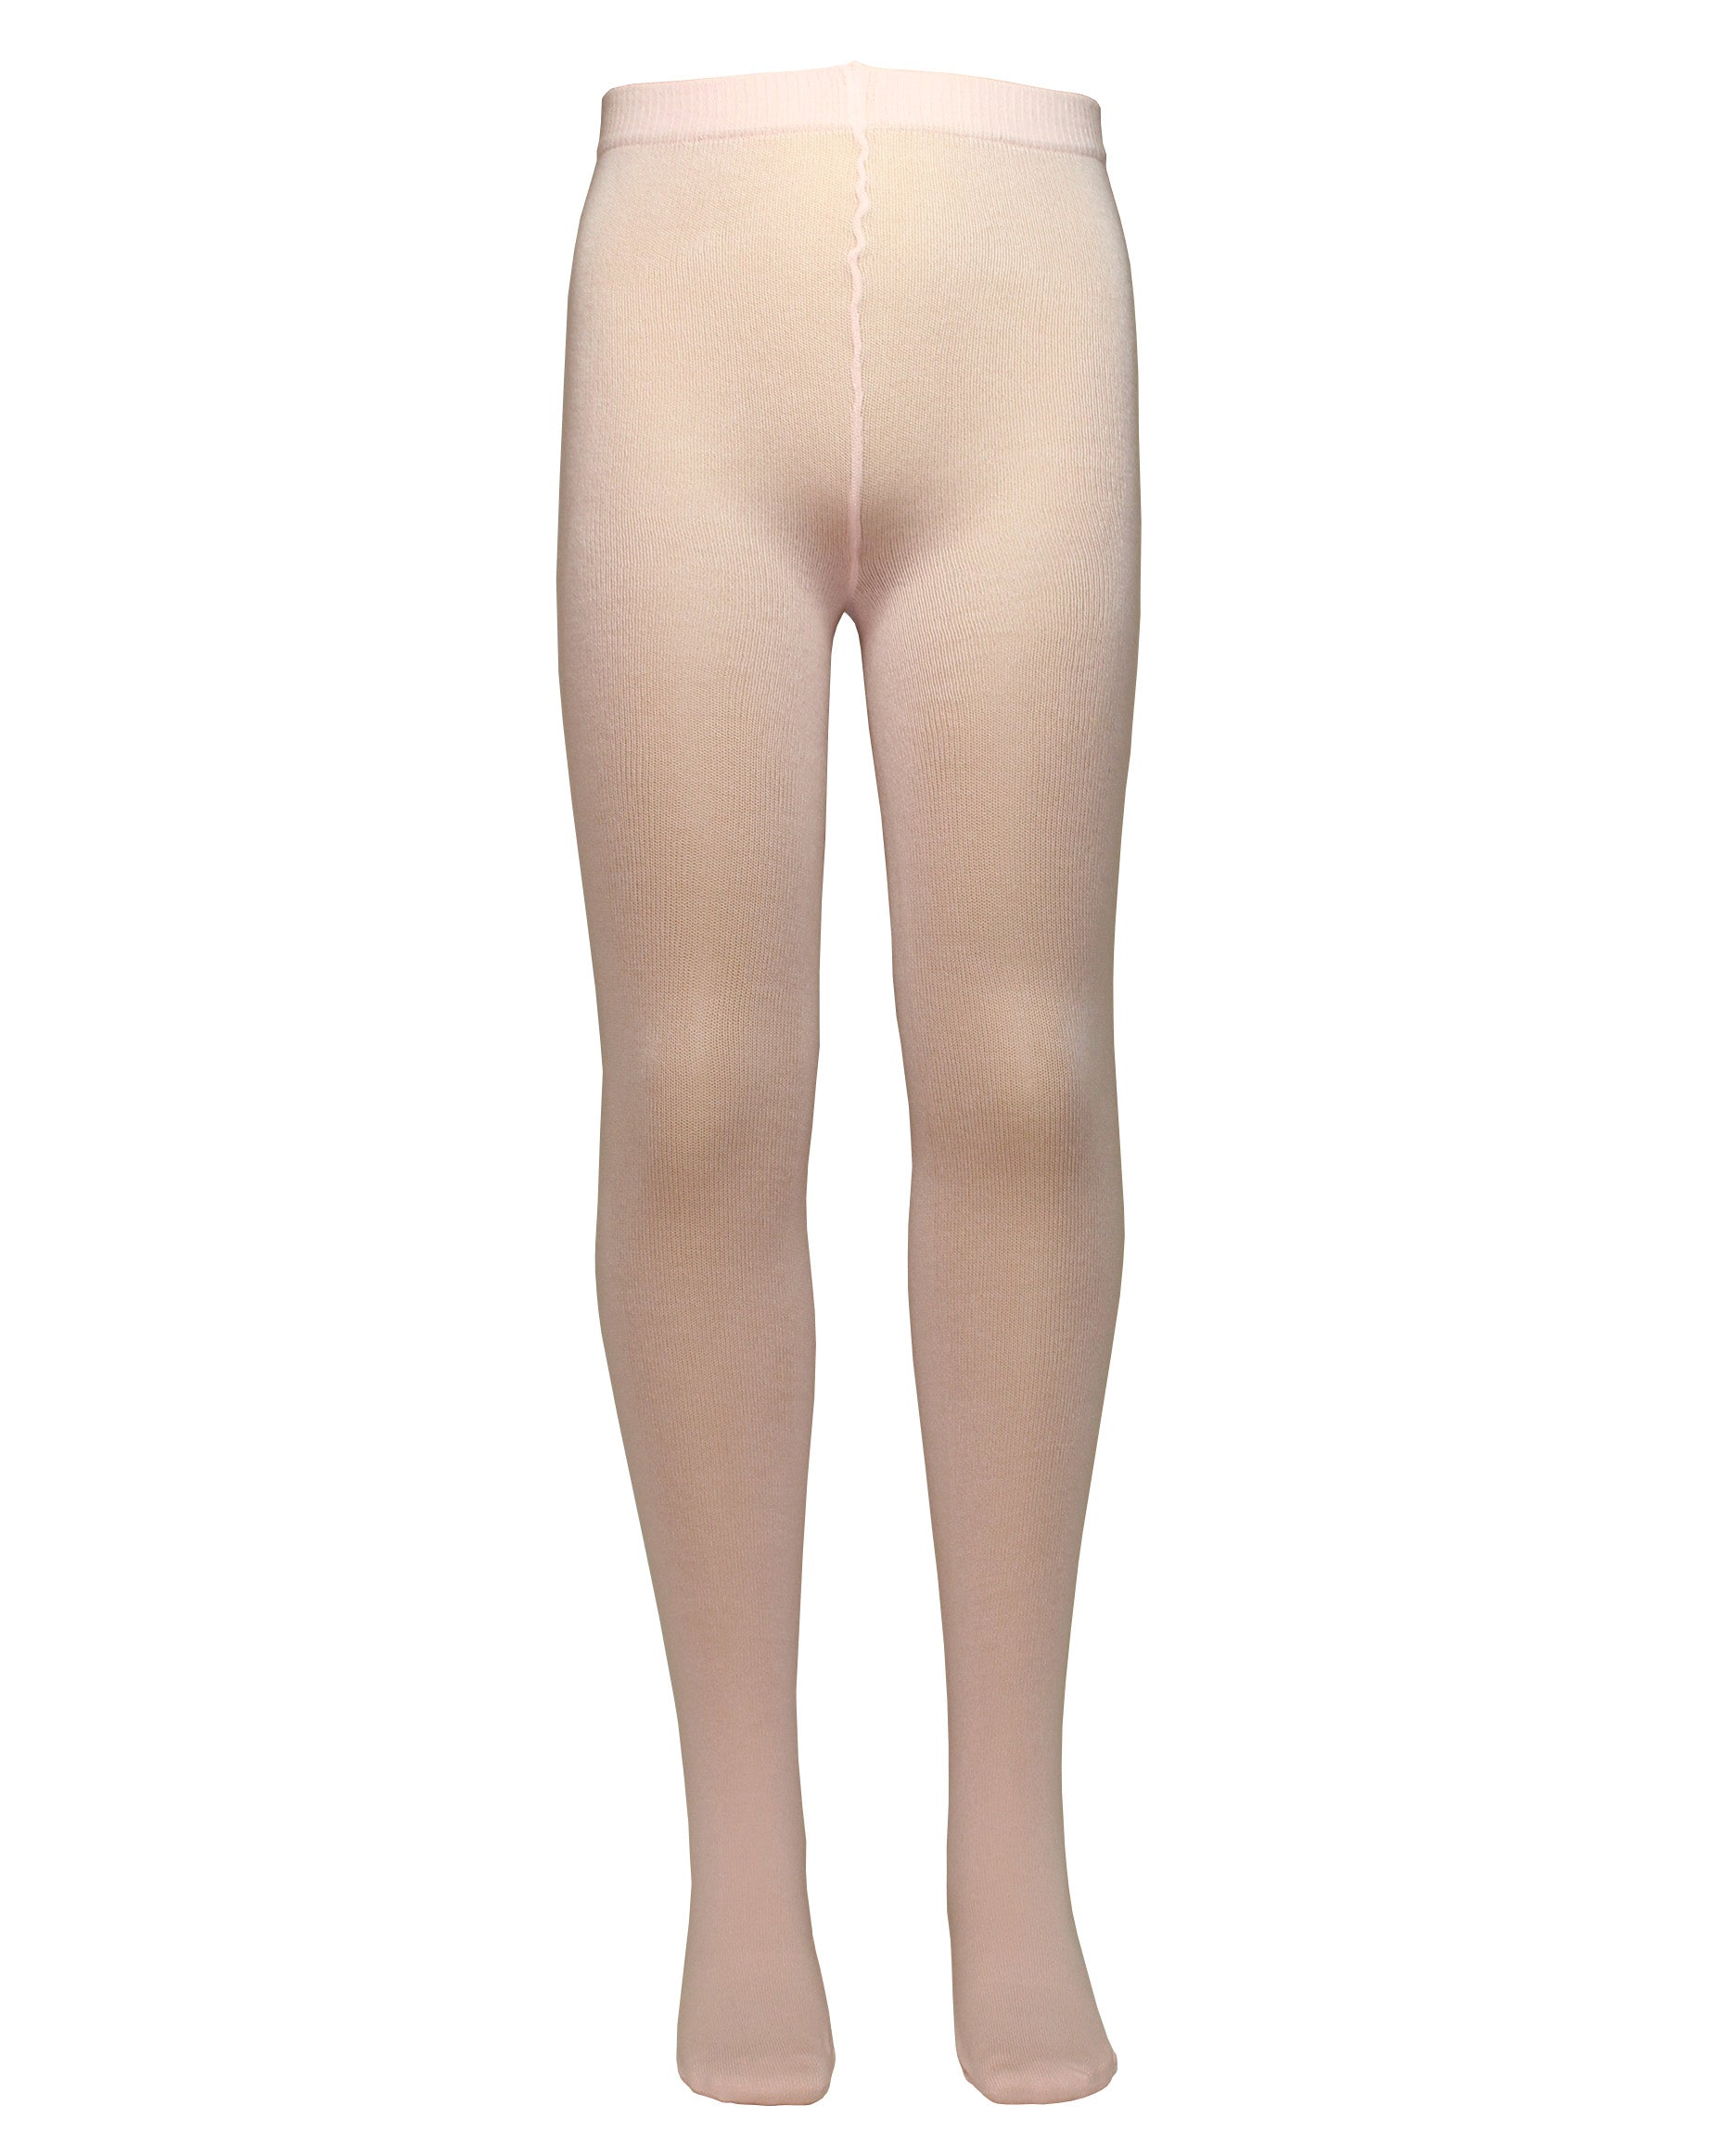 Omsa MiniCotton Collant - Light baby pink soft cotton mix knitted tights with a deep comfort waistband and flat seamless toe.